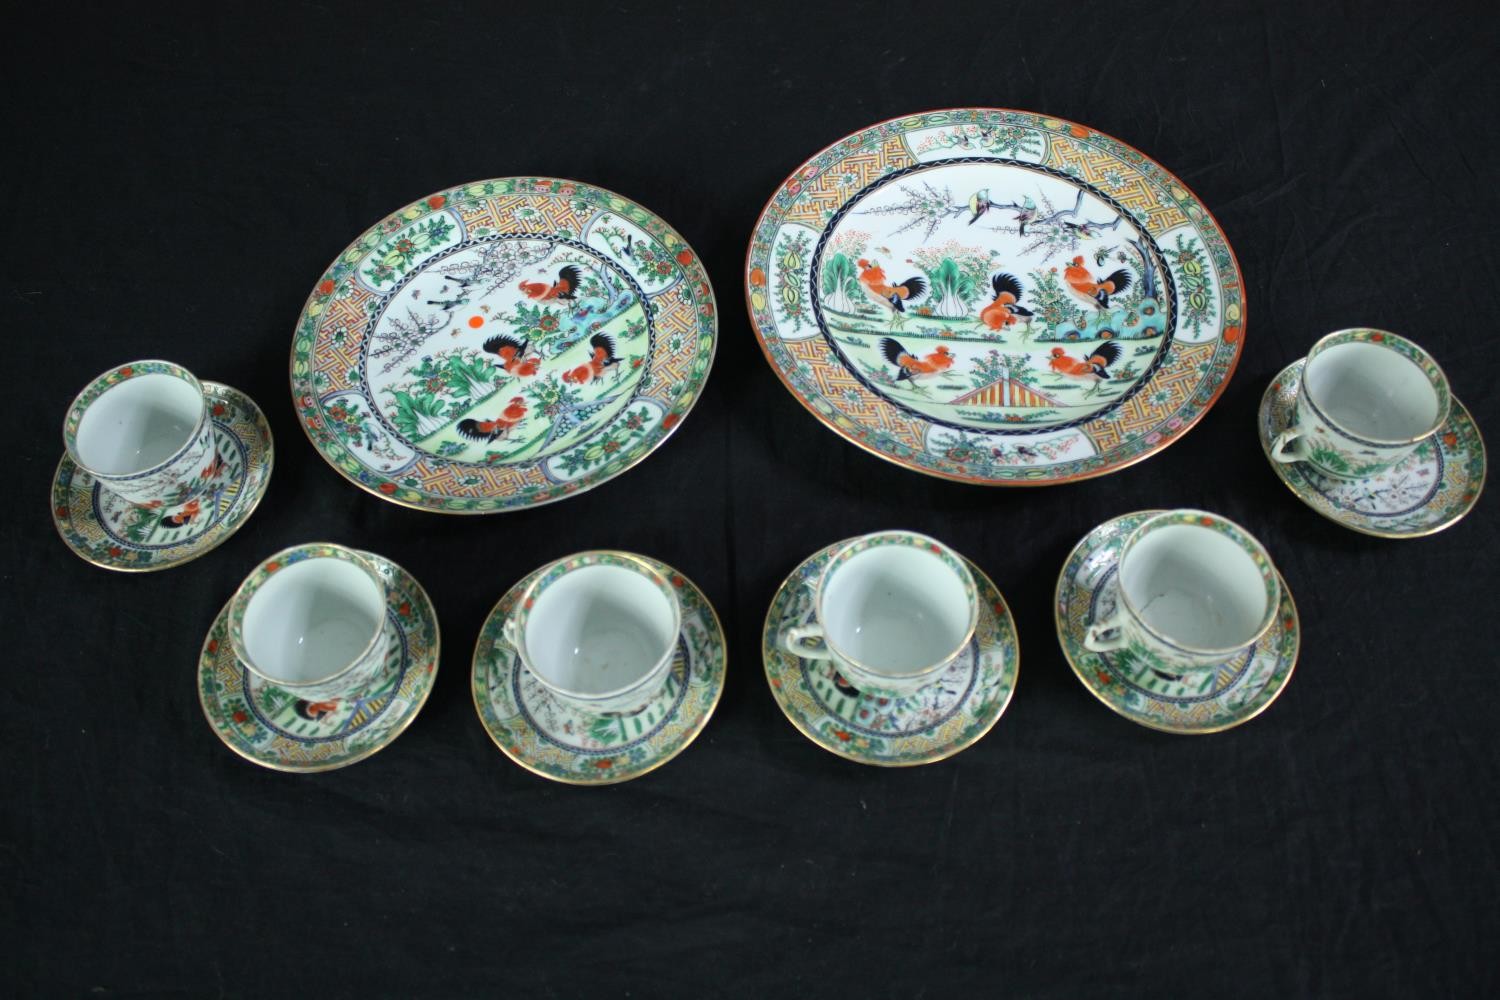 A set of tea cups and saucers. 'Made in China' probably for the export market. Hand painted and